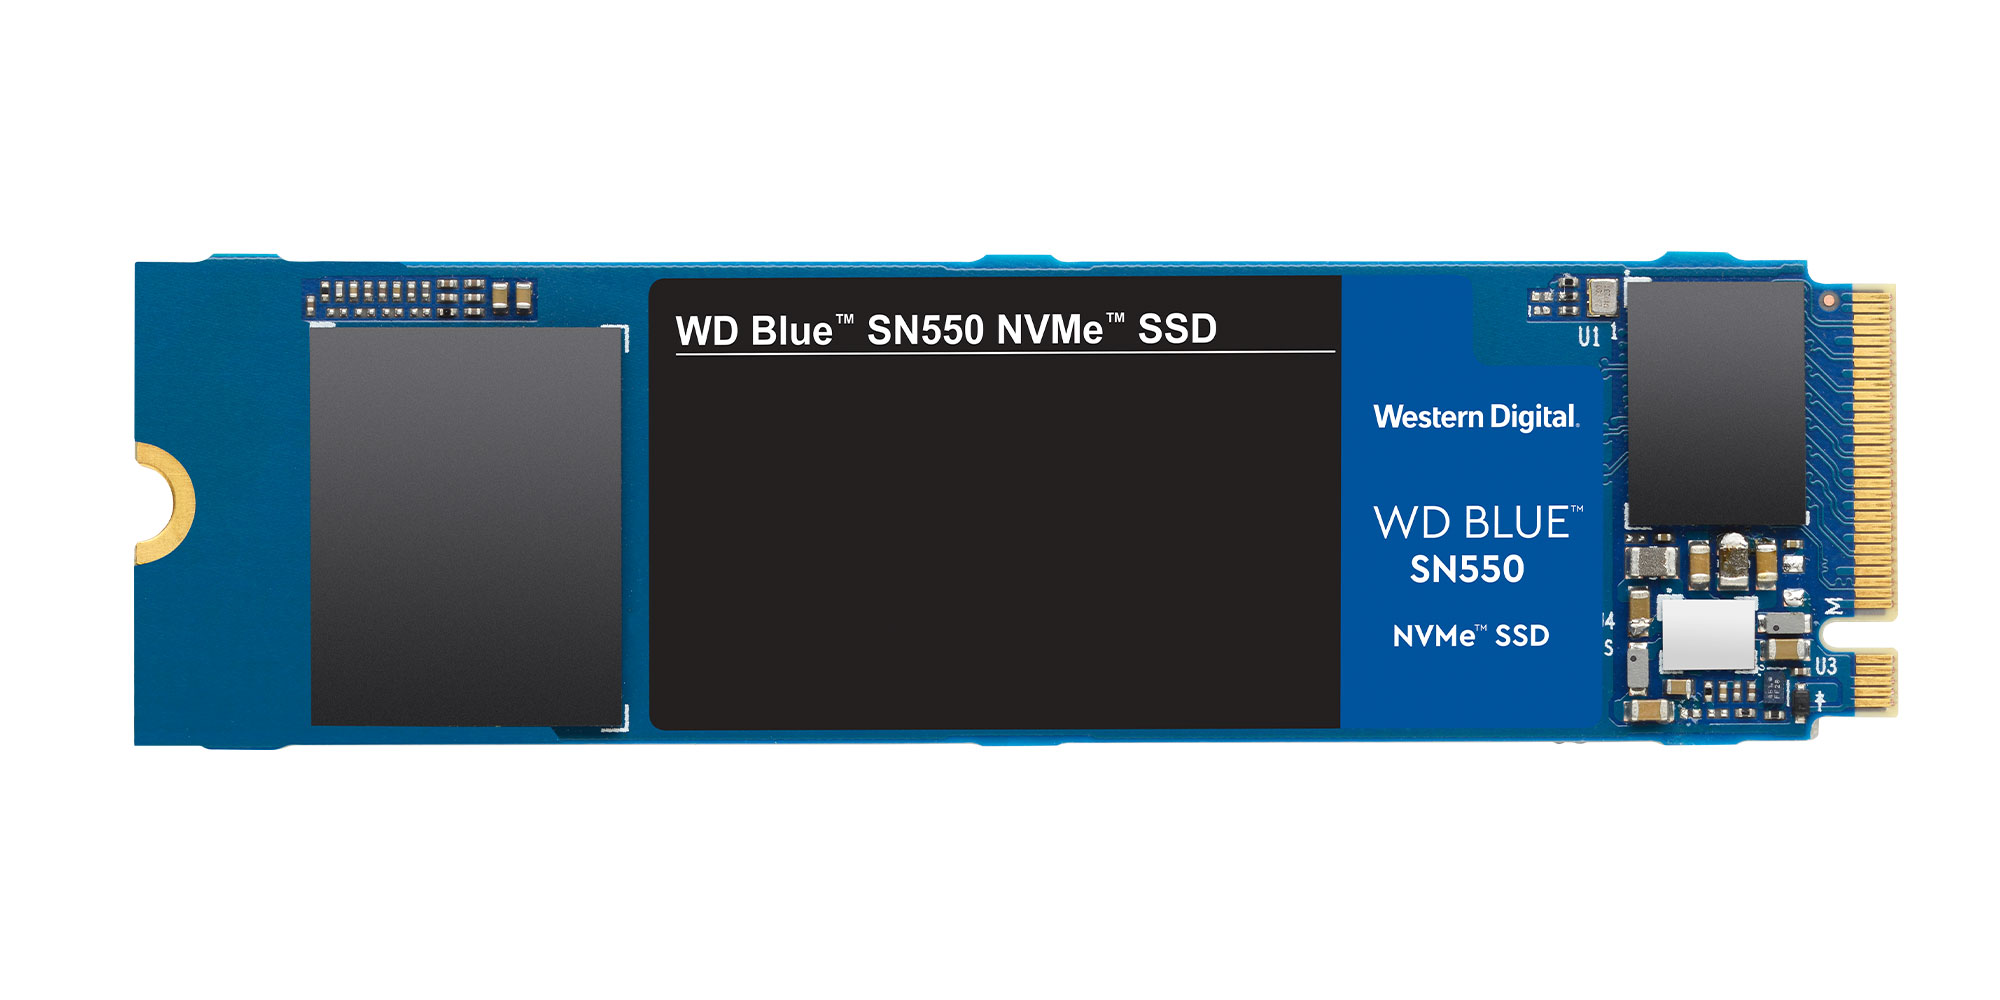 Western Digital announces WD Blue SN550 NVMe SSD - 9to5Toys